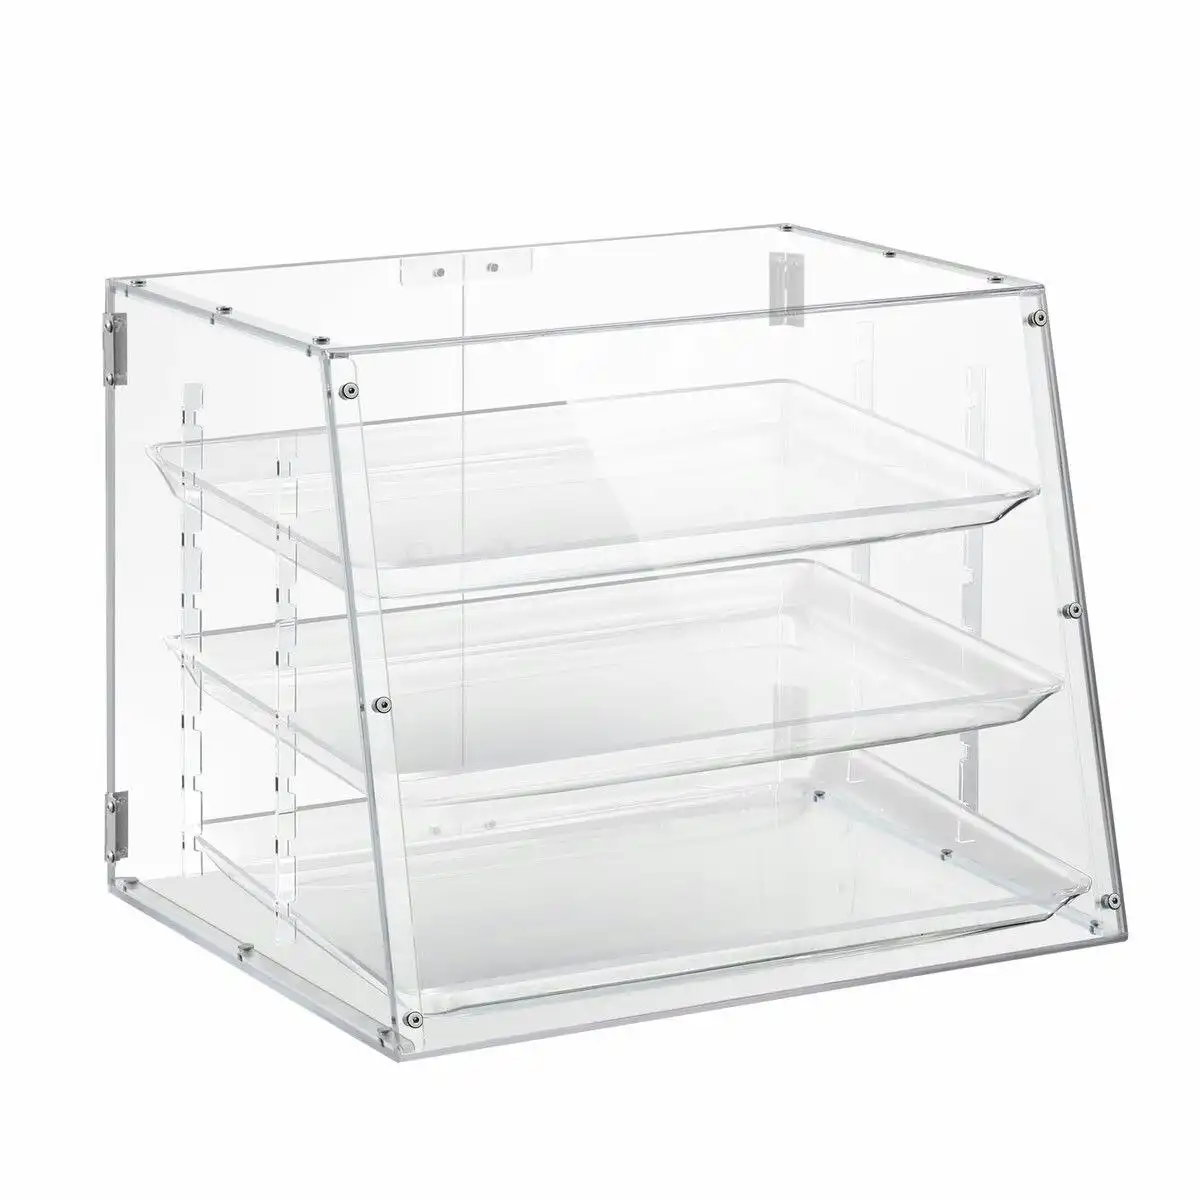 LUXSUITE Cake Display Cabinet 3 Tier Acrylic Bakery Cupcake Stand Case Unit Holder Muffin Donut Pastry Model Toy Showcase Adjustable Shelf 5mm Thick